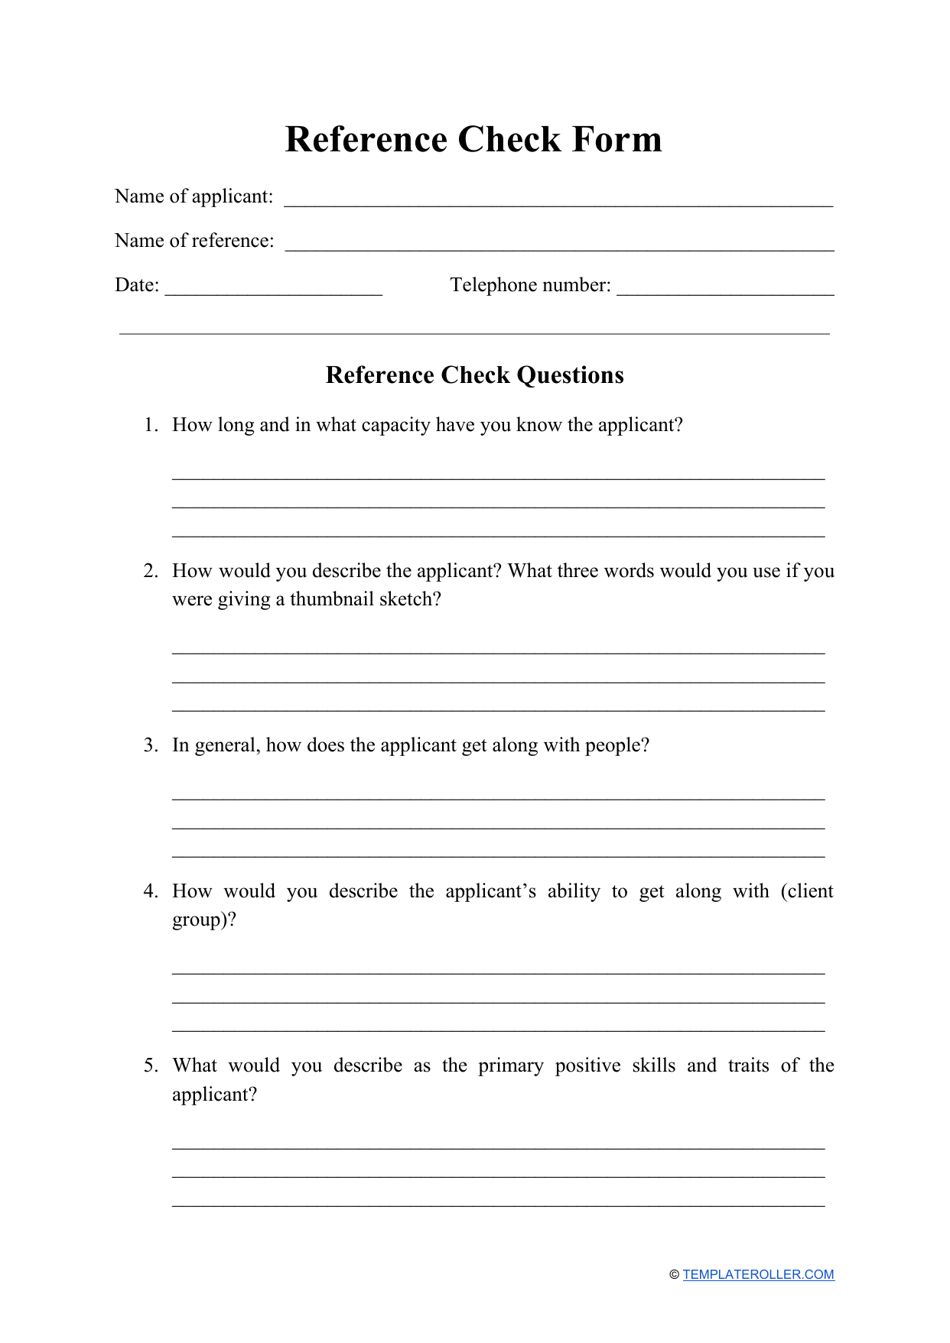 reference-check-form-fill-out-sign-online-and-download-pdf